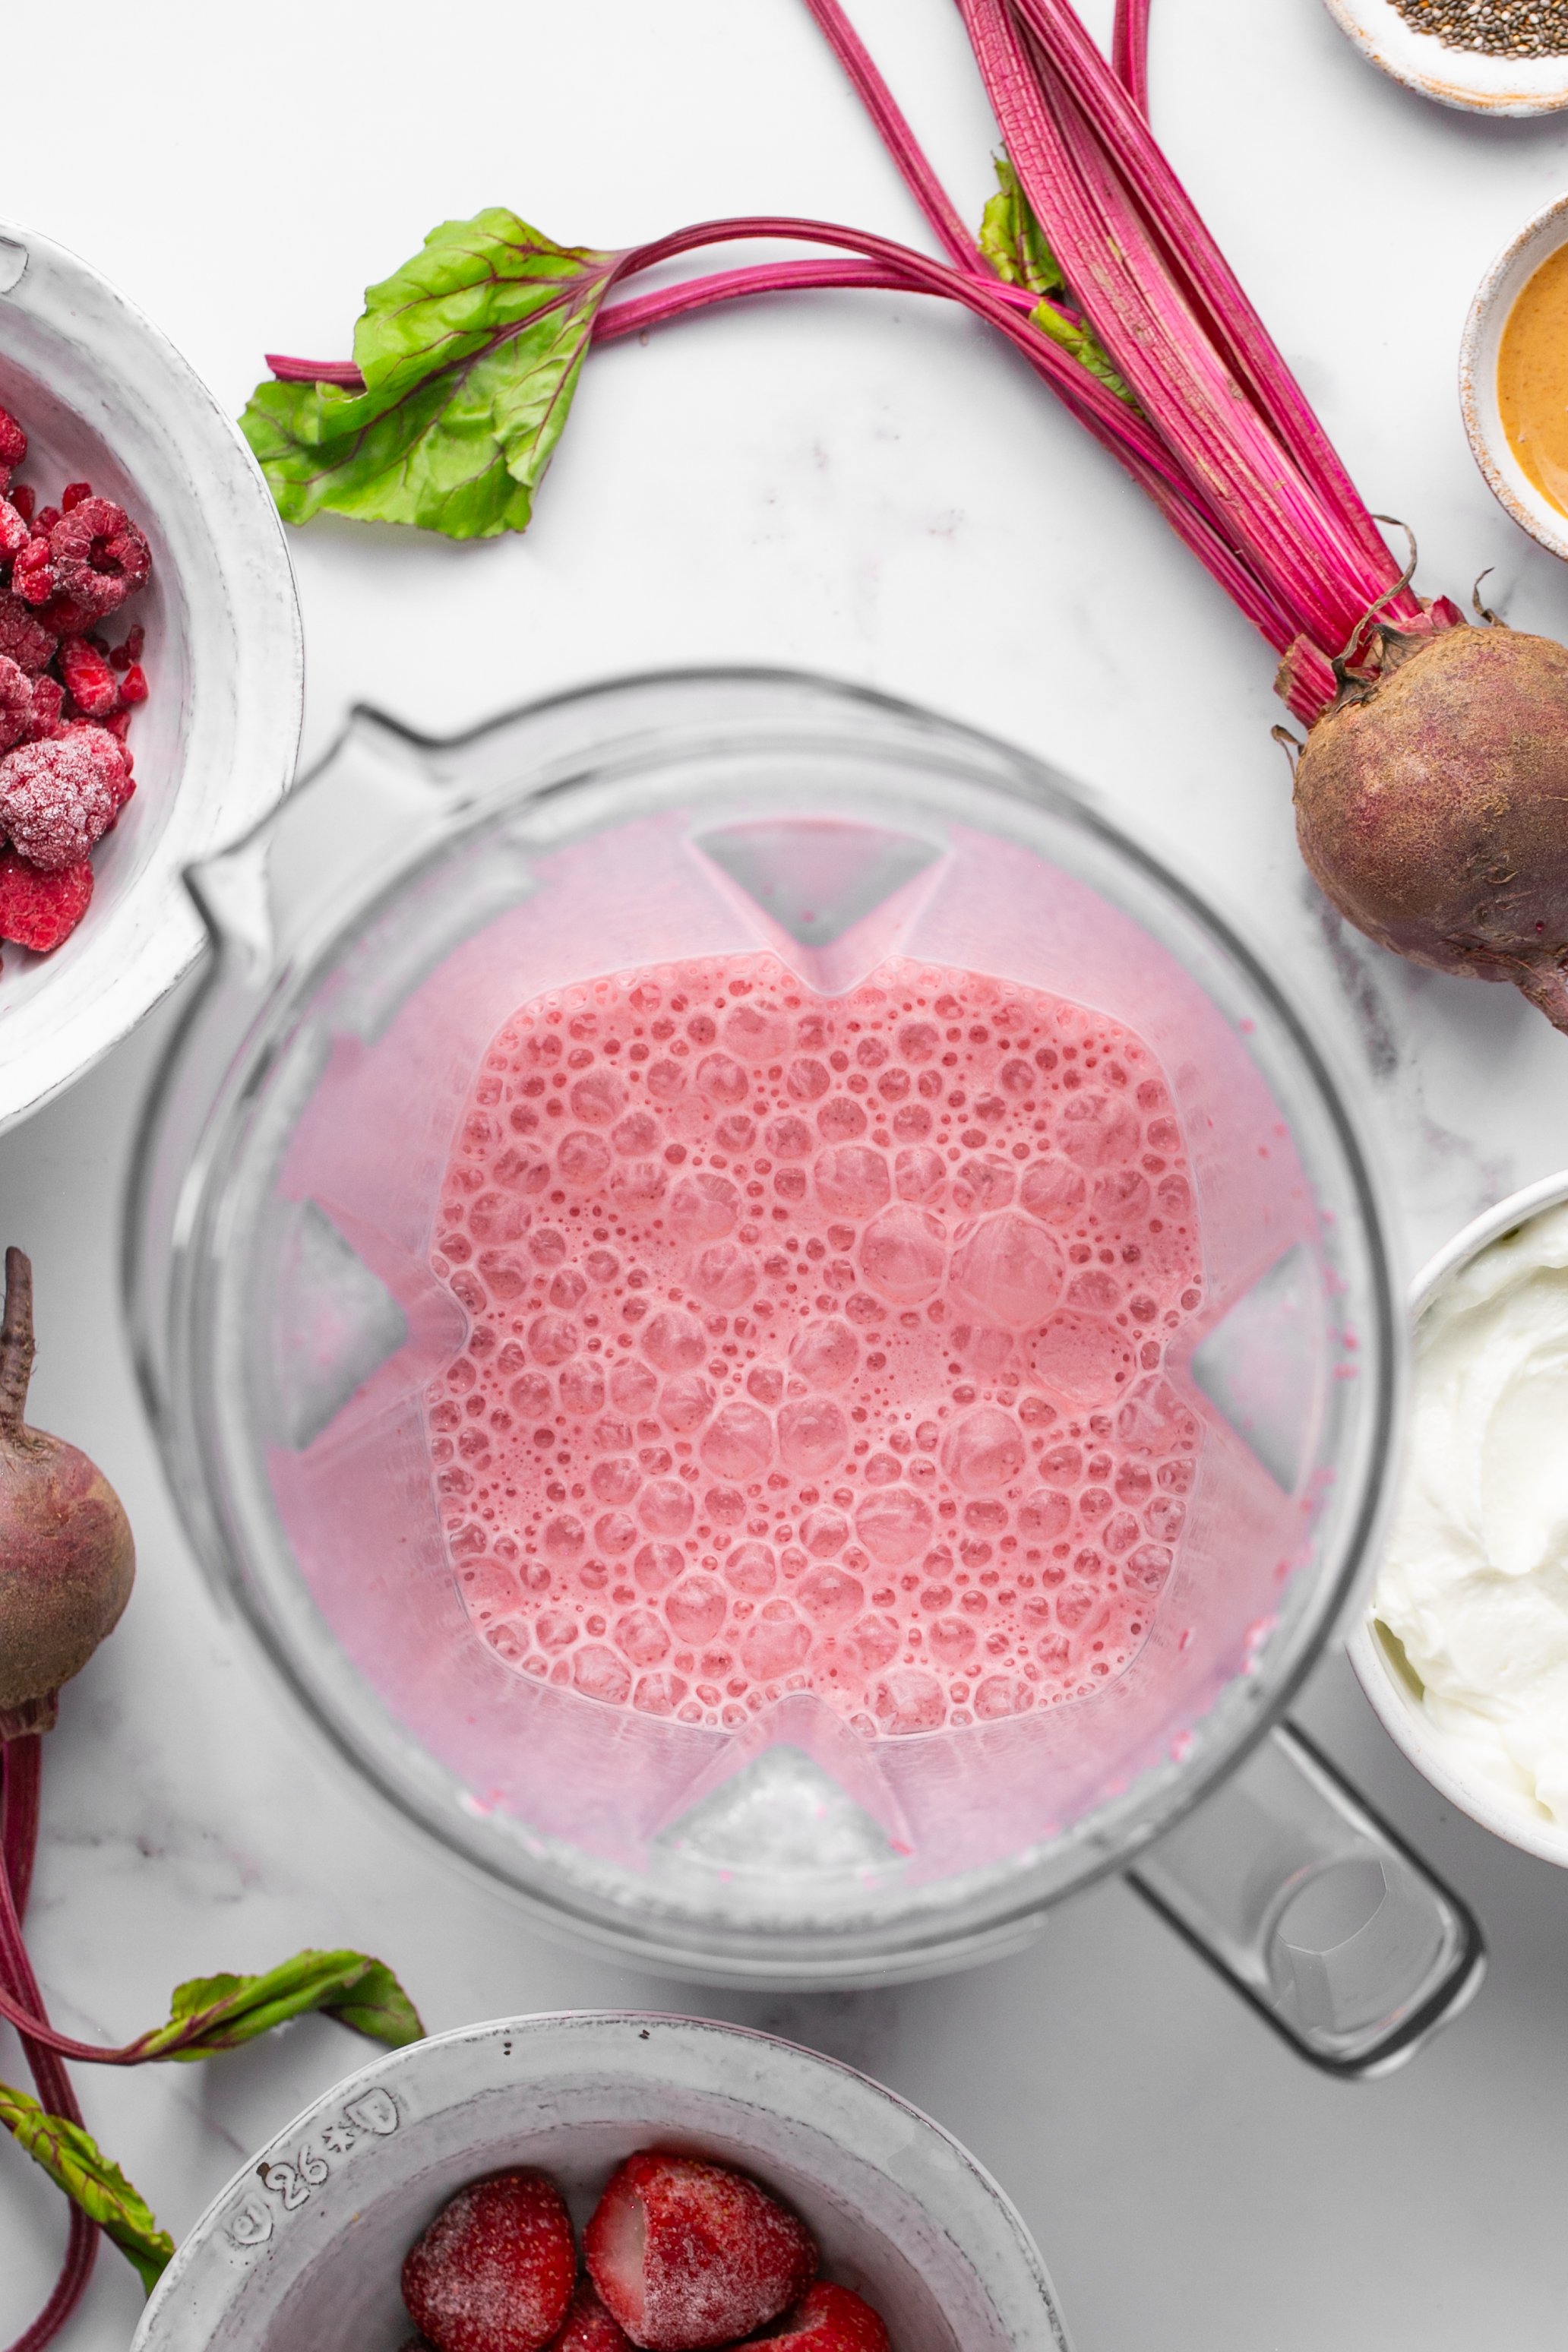 Pureed beet in a blender with milk. Bowls of ingredients for the smoothie are on the table next to the blender.